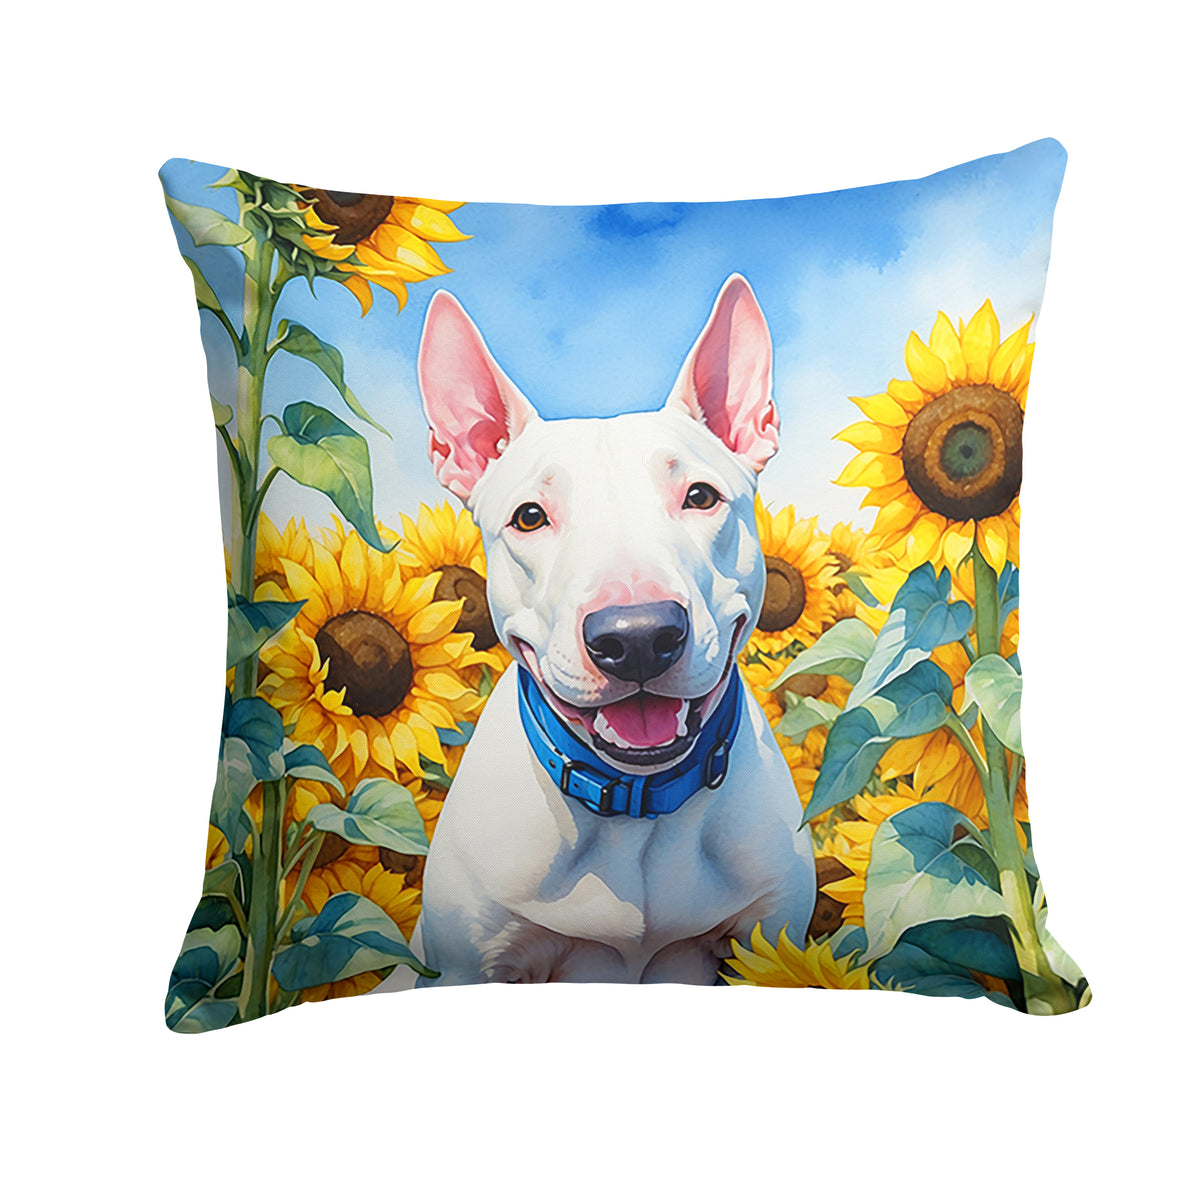 Buy this English Bull Terrier in Sunflowers Throw Pillow